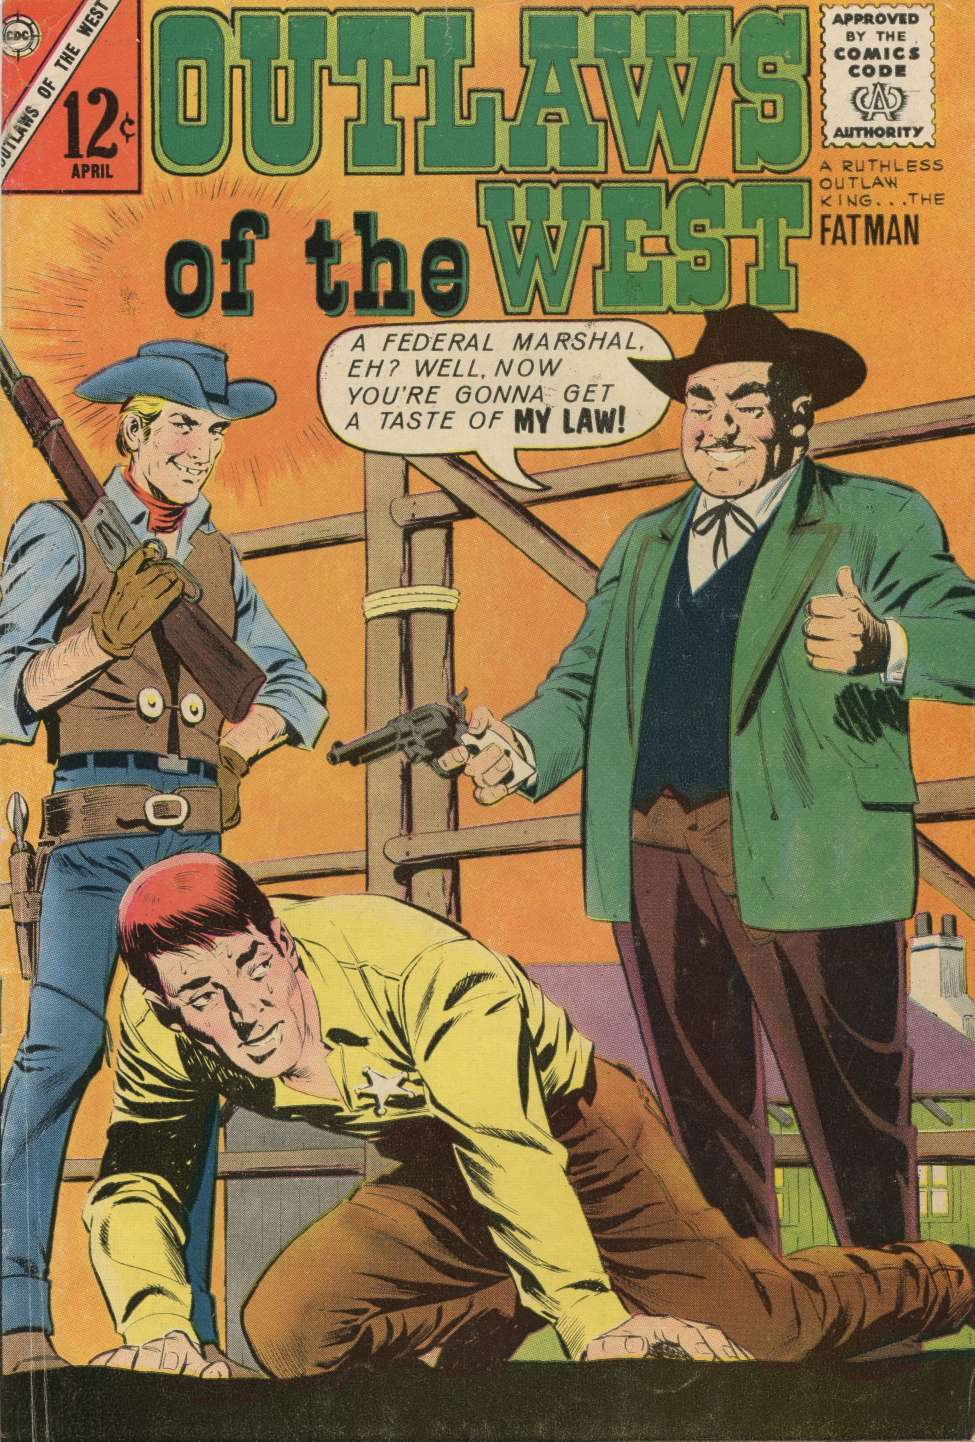 Book Cover For Outlaws of the West 42